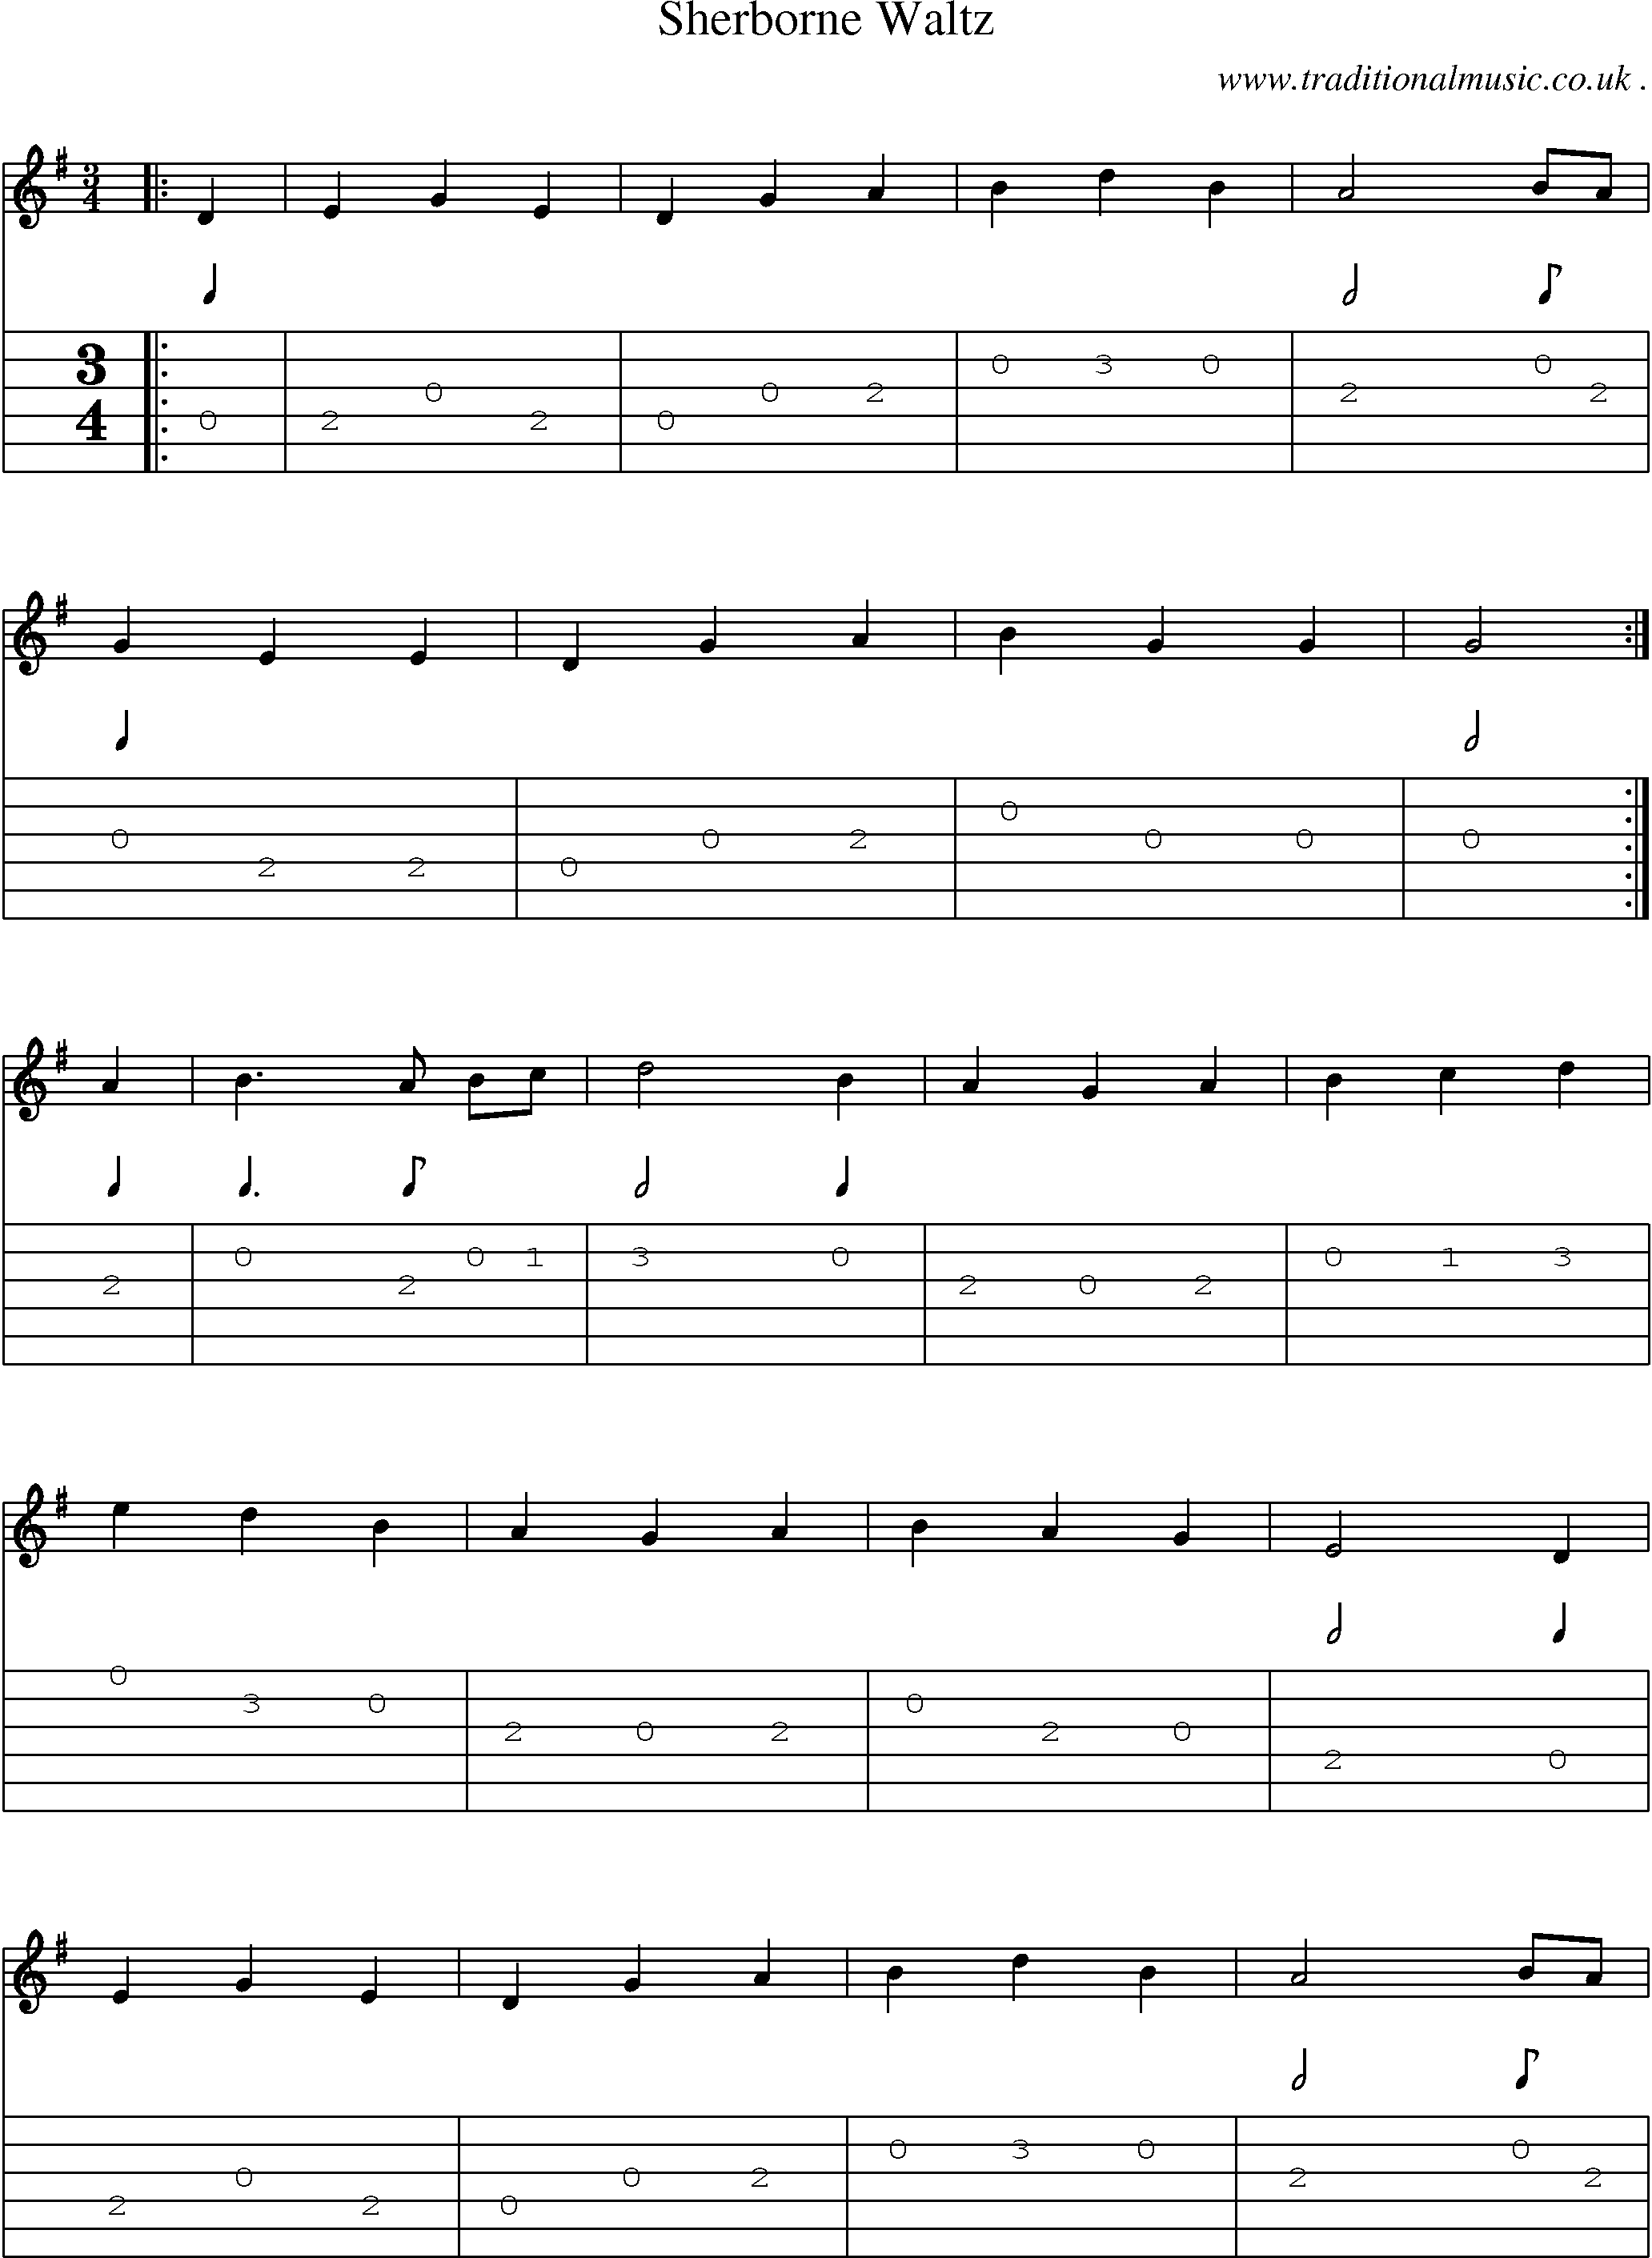 Sheet-Music and Guitar Tabs for Sherborne Waltz